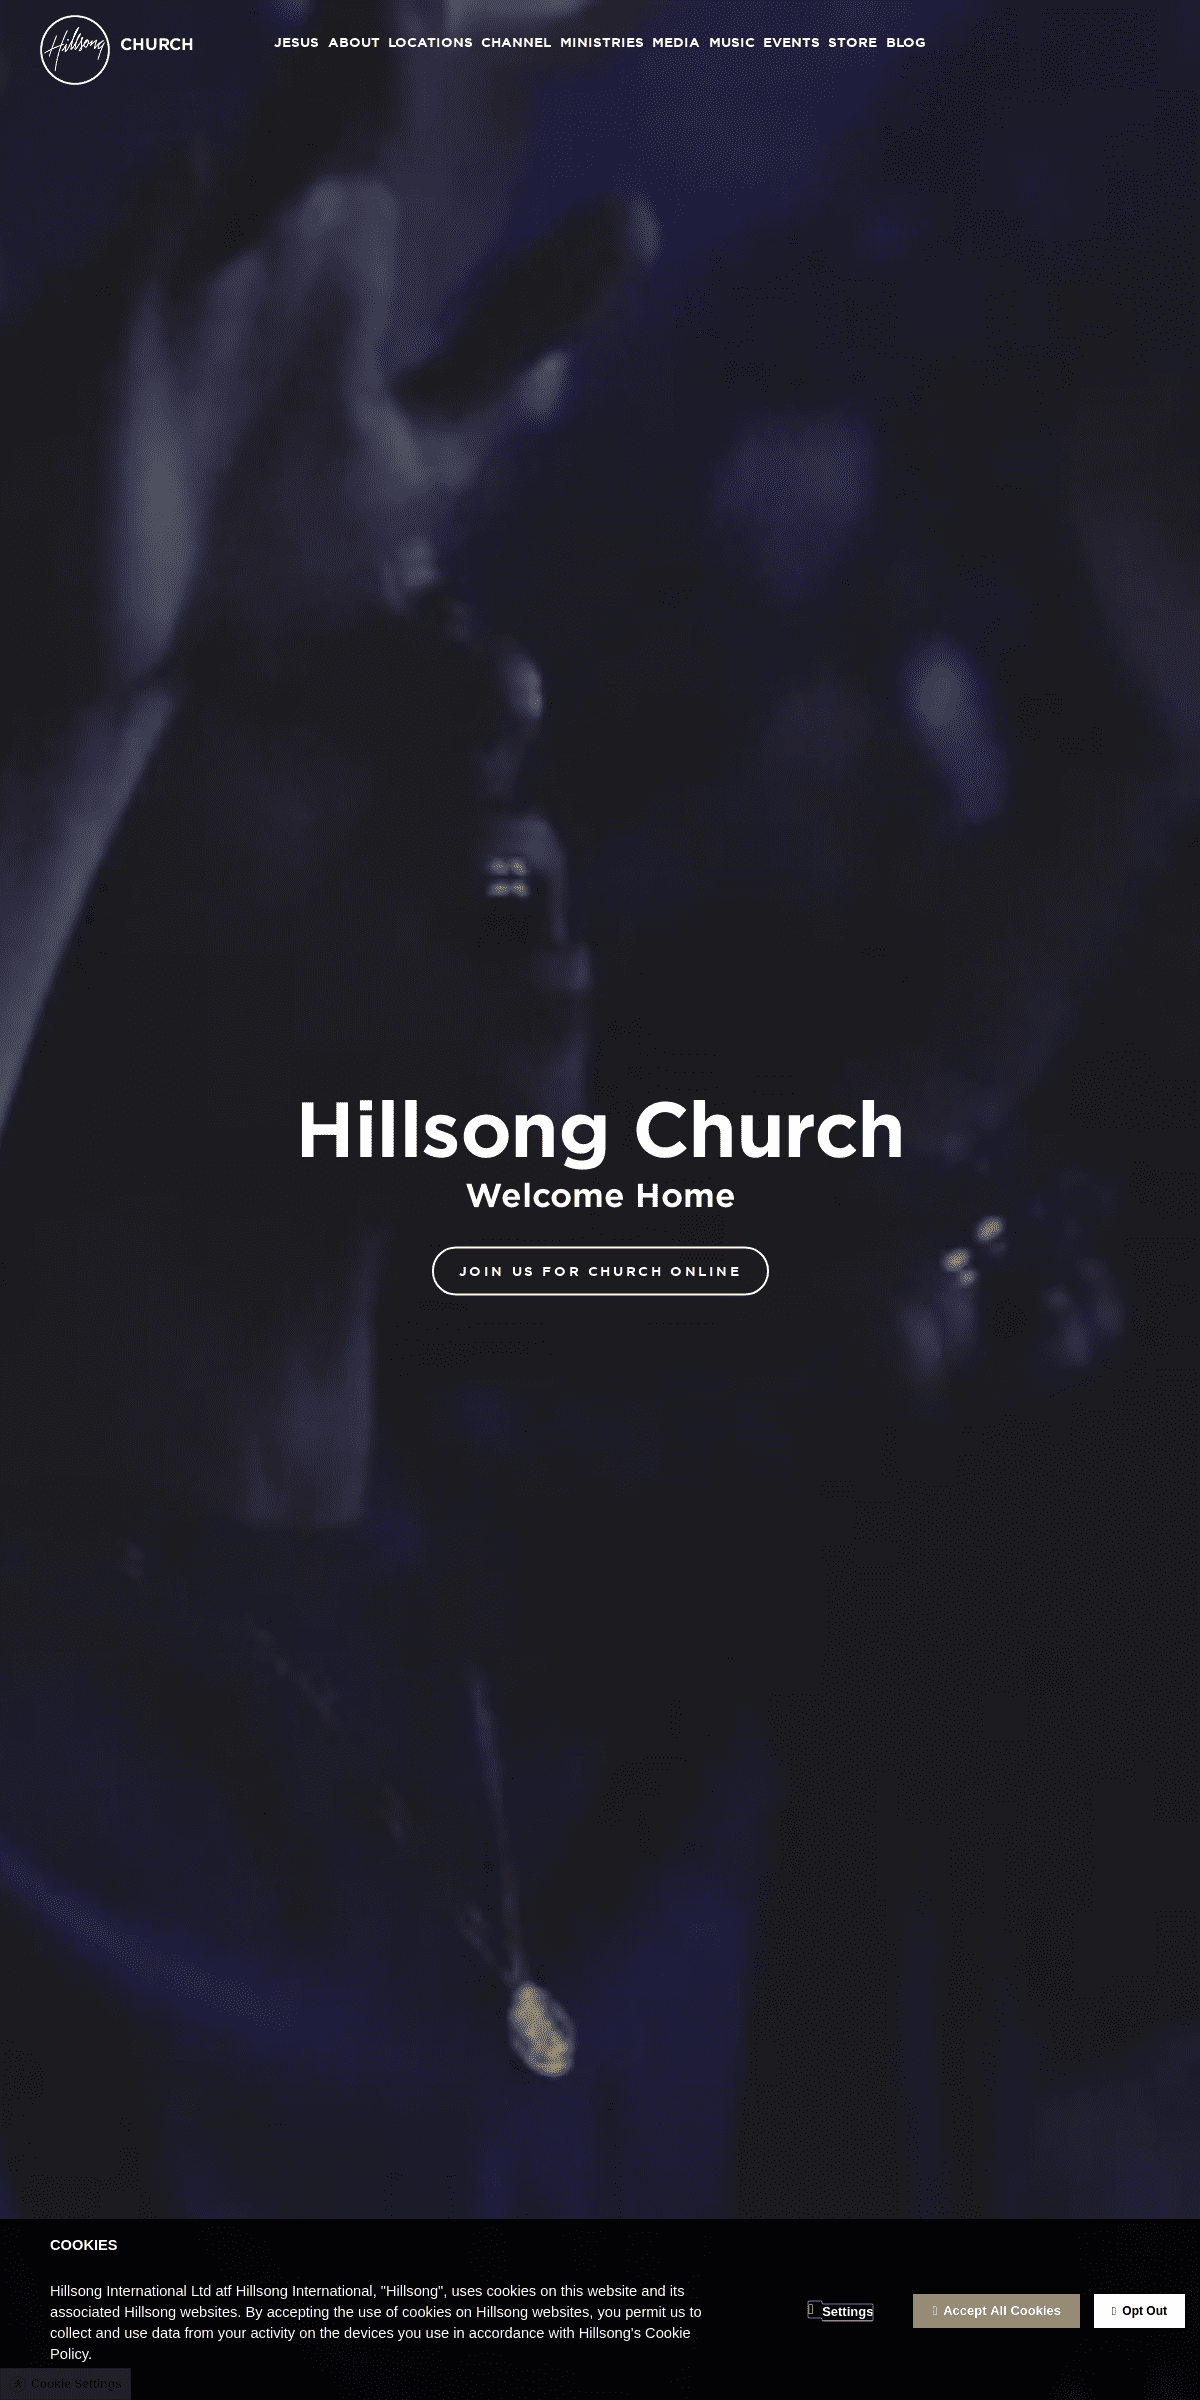 A complete backup of hillsong.com